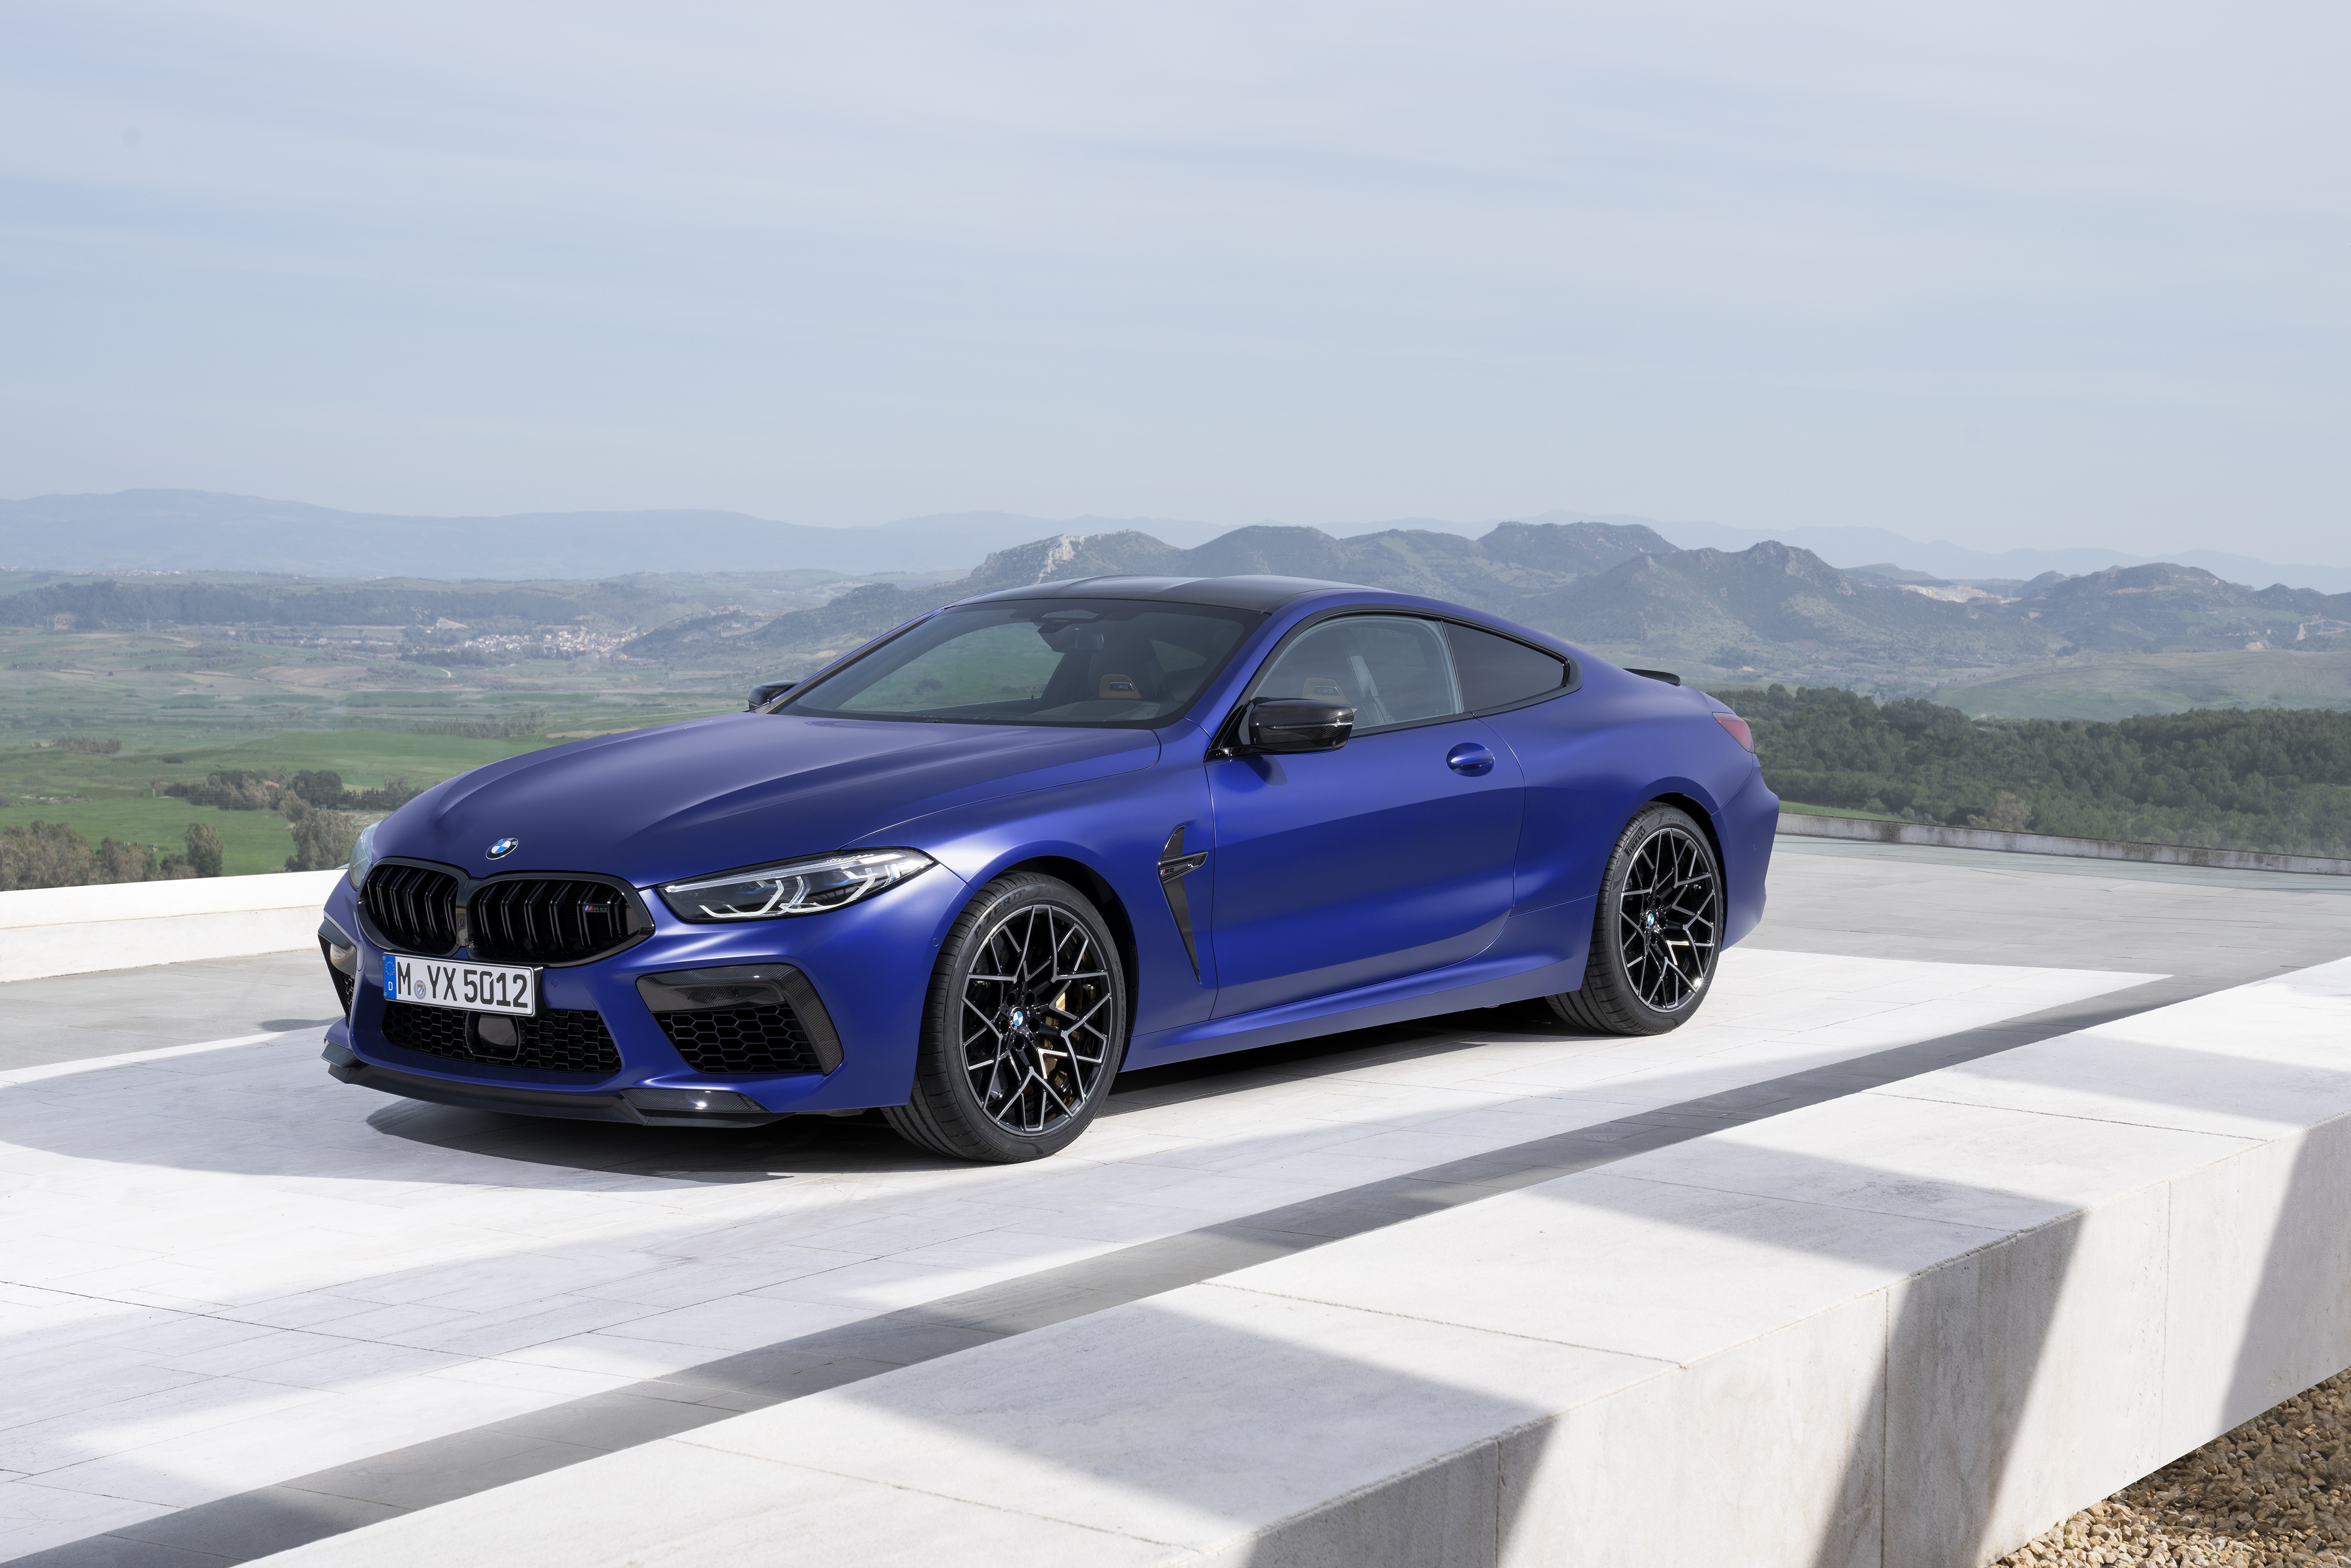 Bmw m 8 competition. БМВ м8 ф92. BMW m8 Coupe. BMW m8 Competition Coupe 2020. BMW m8 2019.